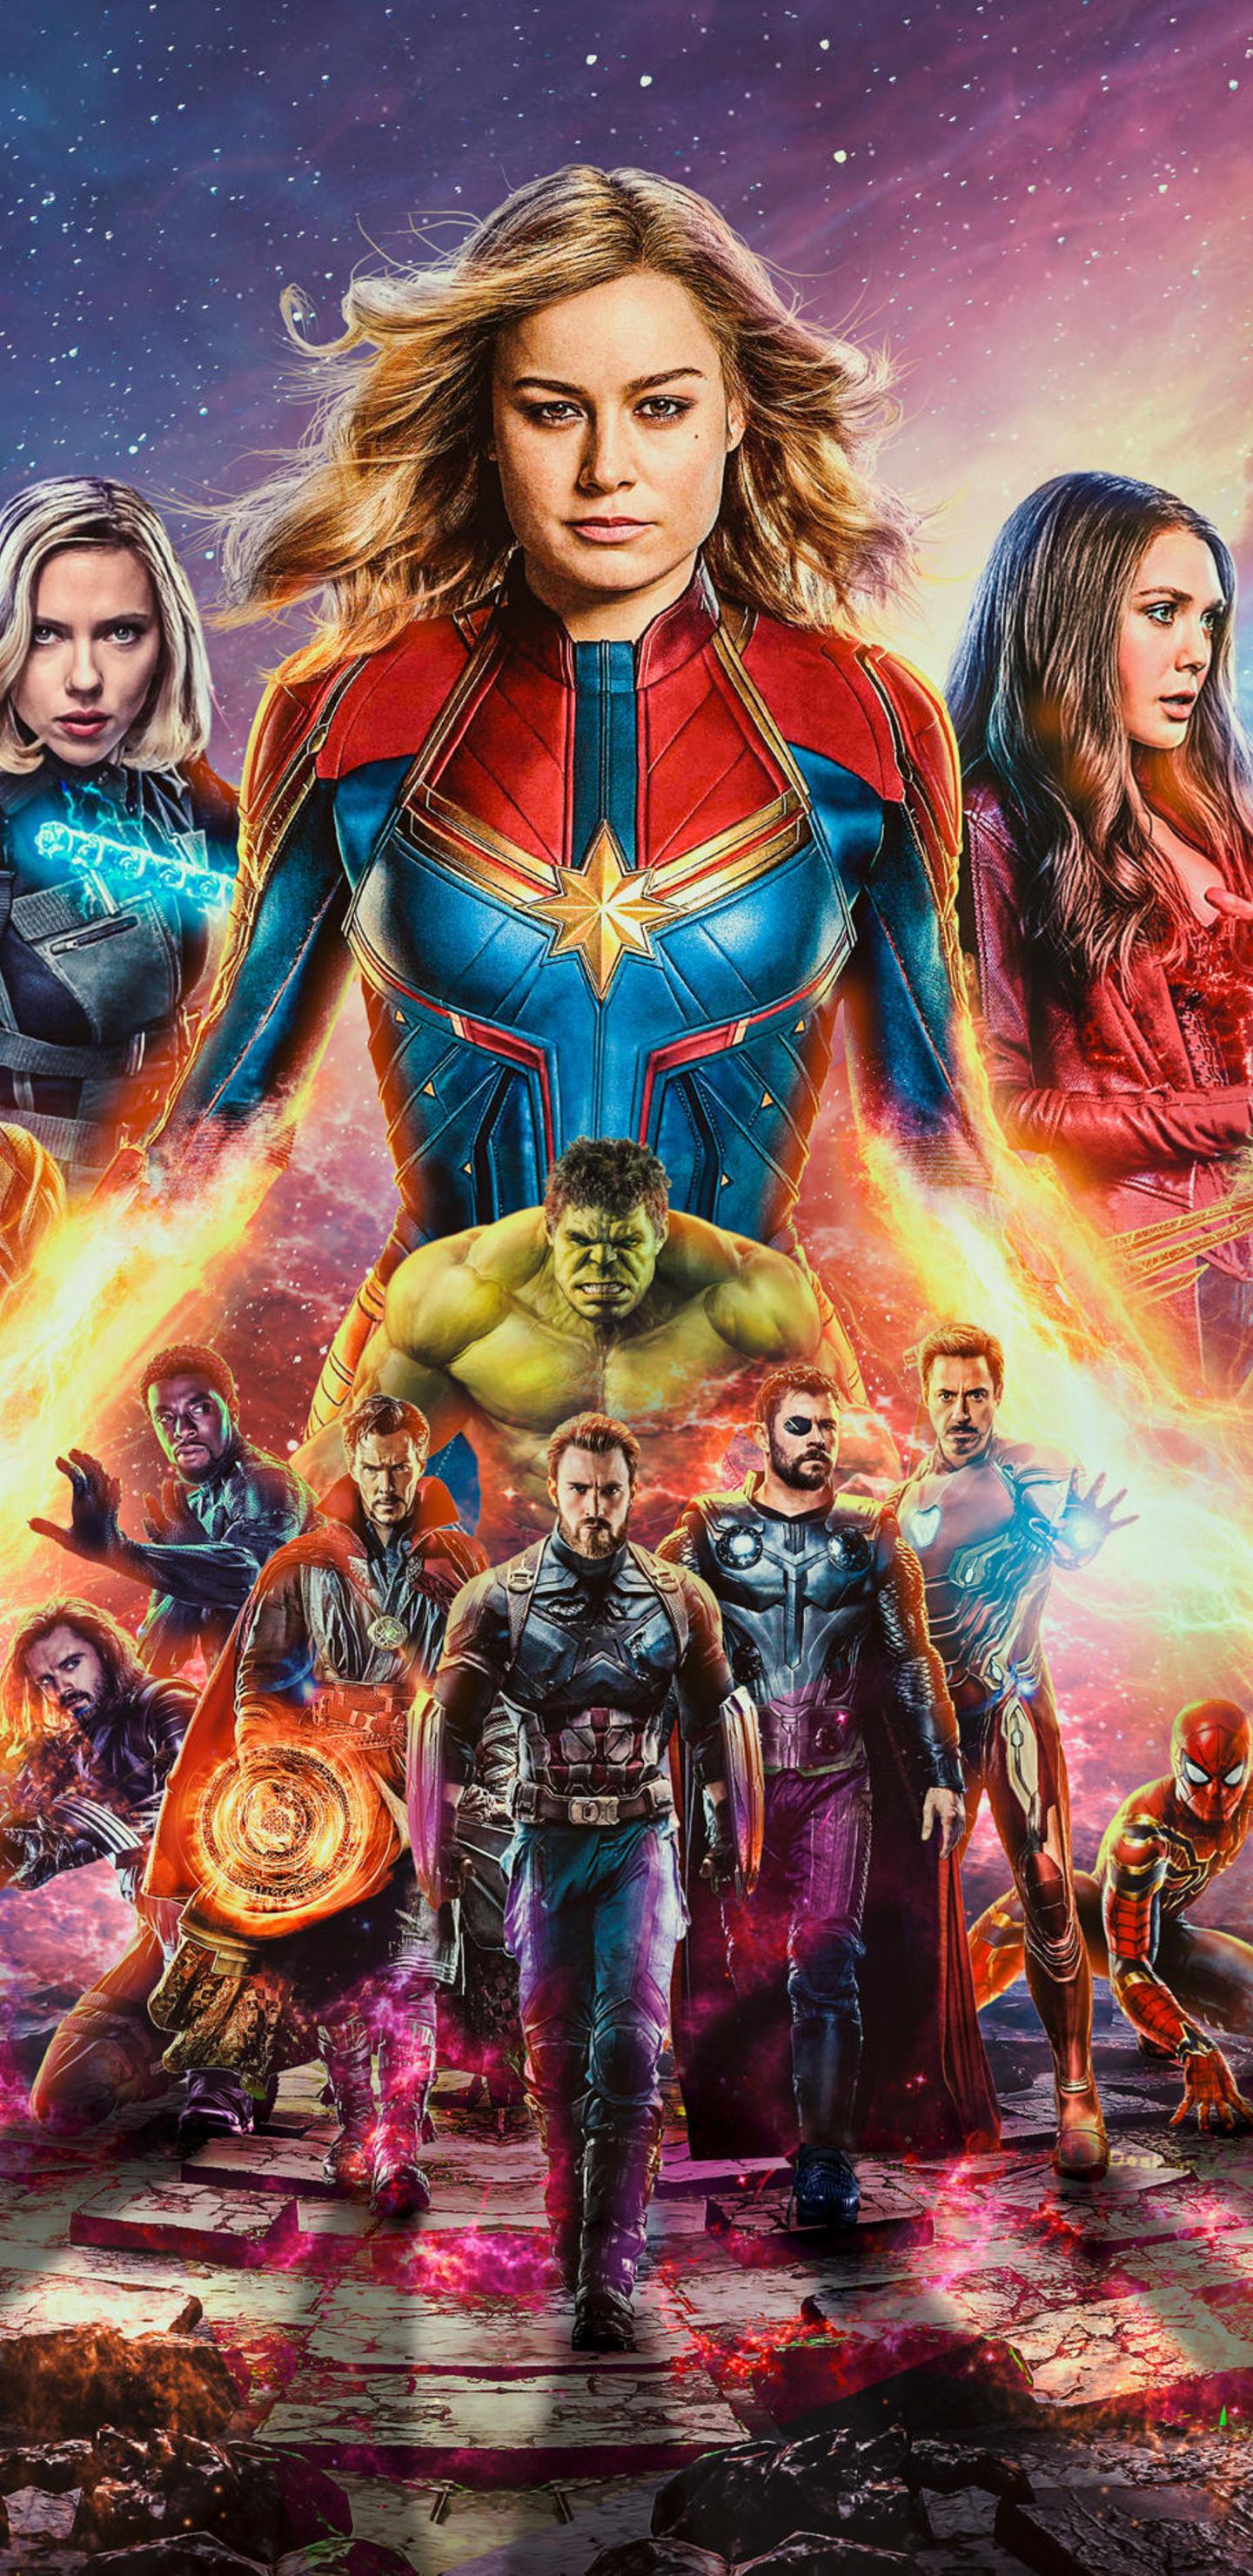 Avengers End Game Samsung Galaxy Note S S8